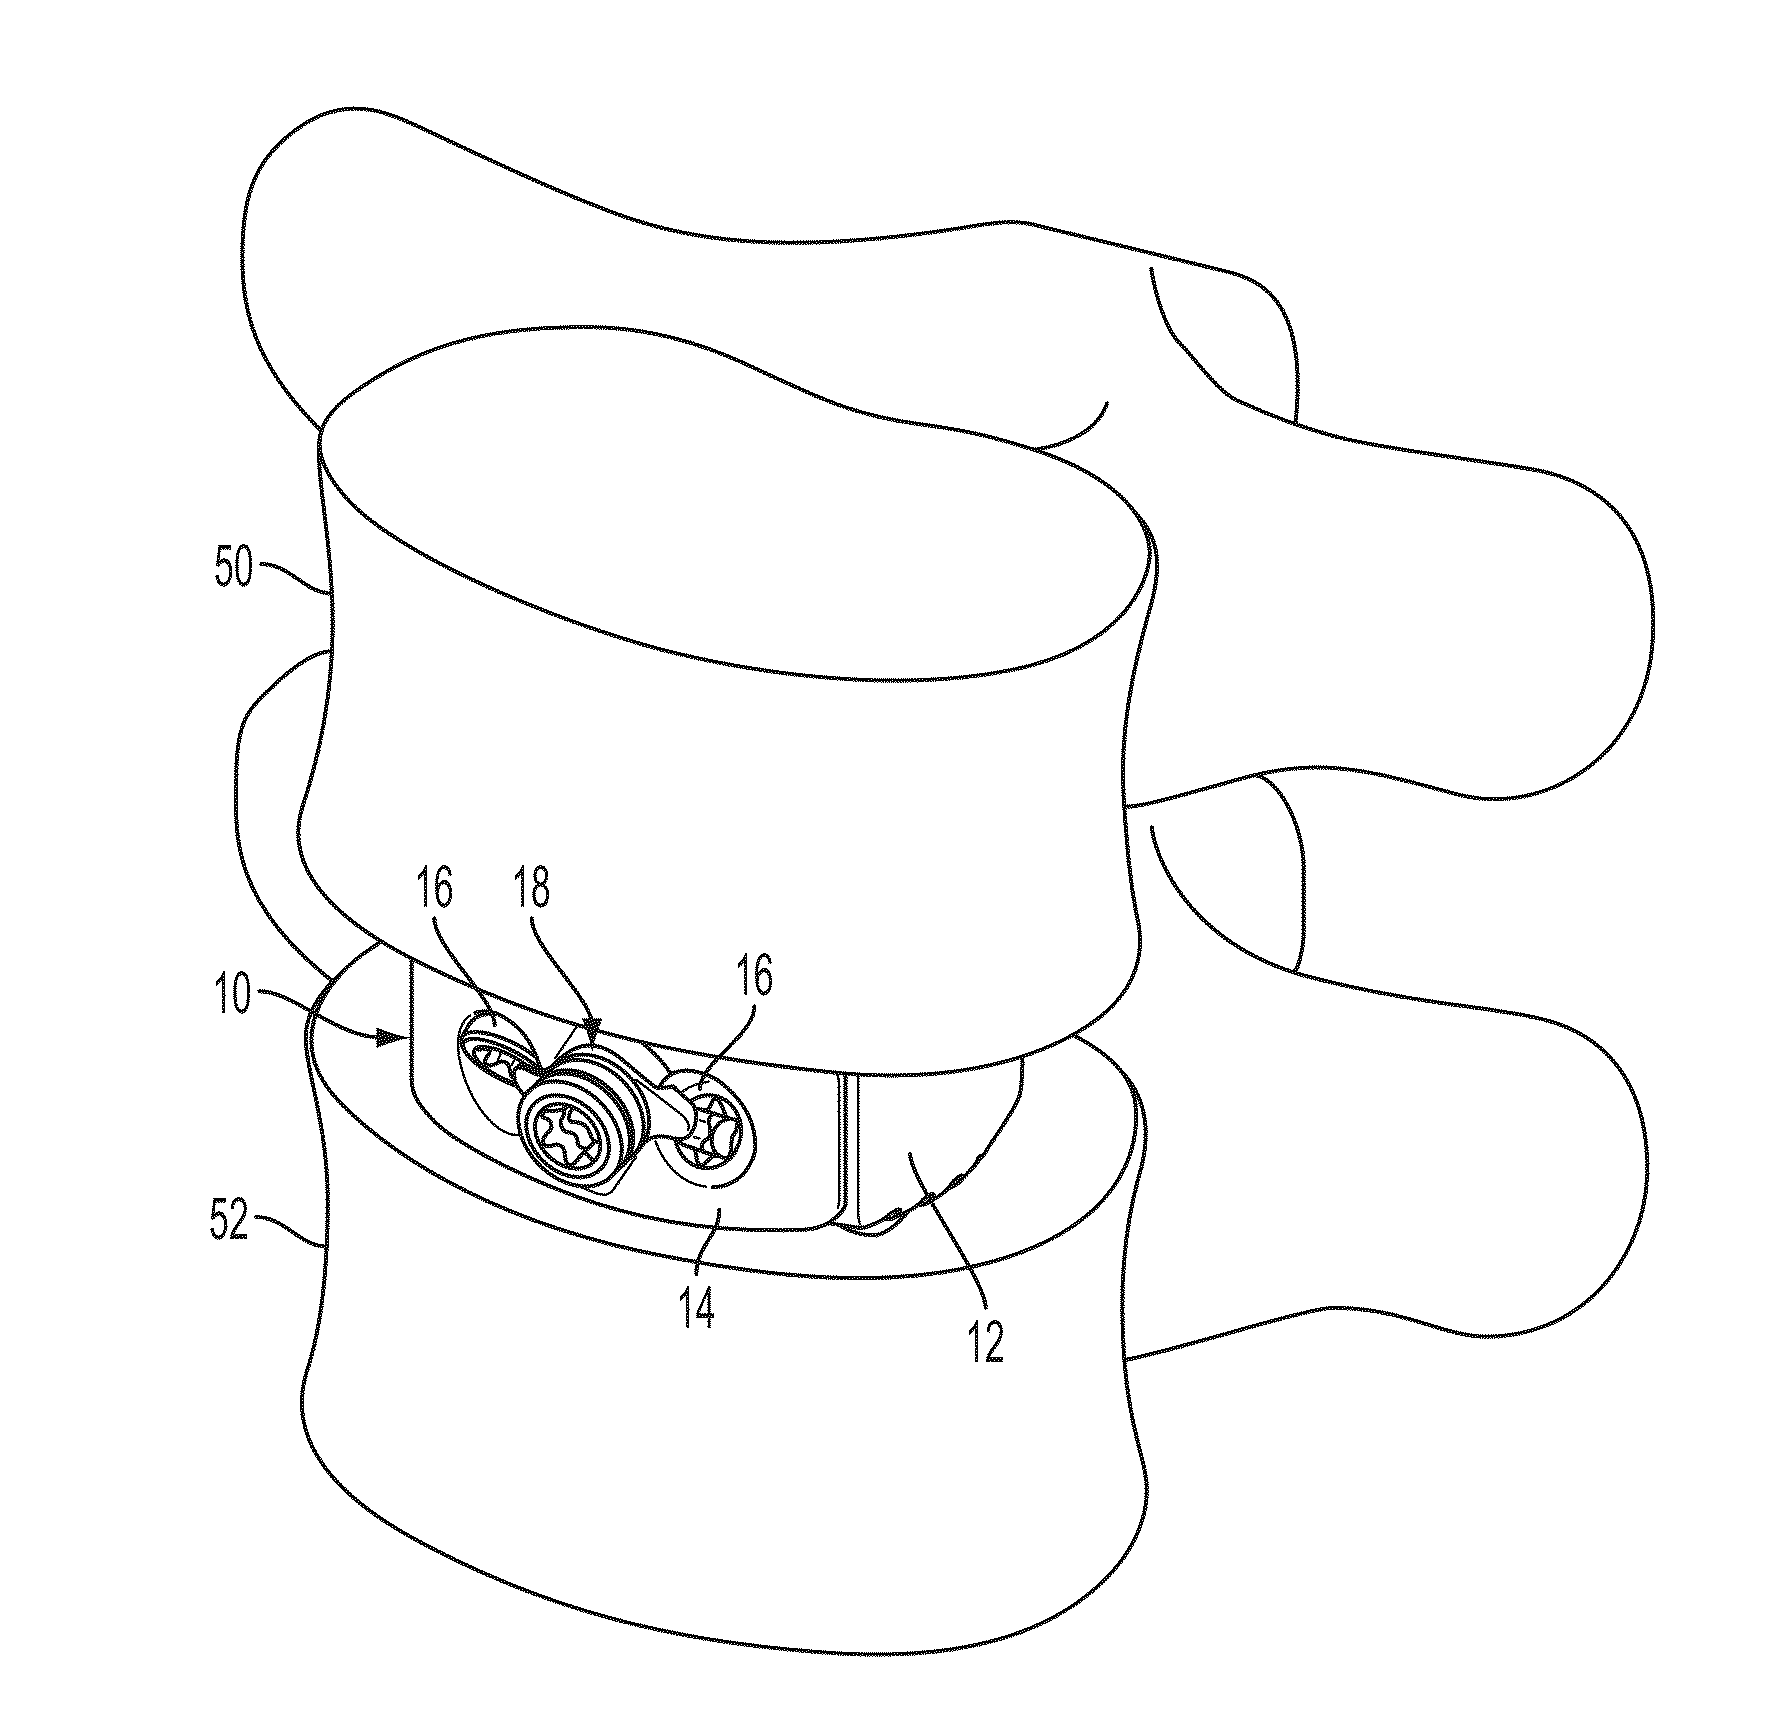 Interbody fusion device and associated methods